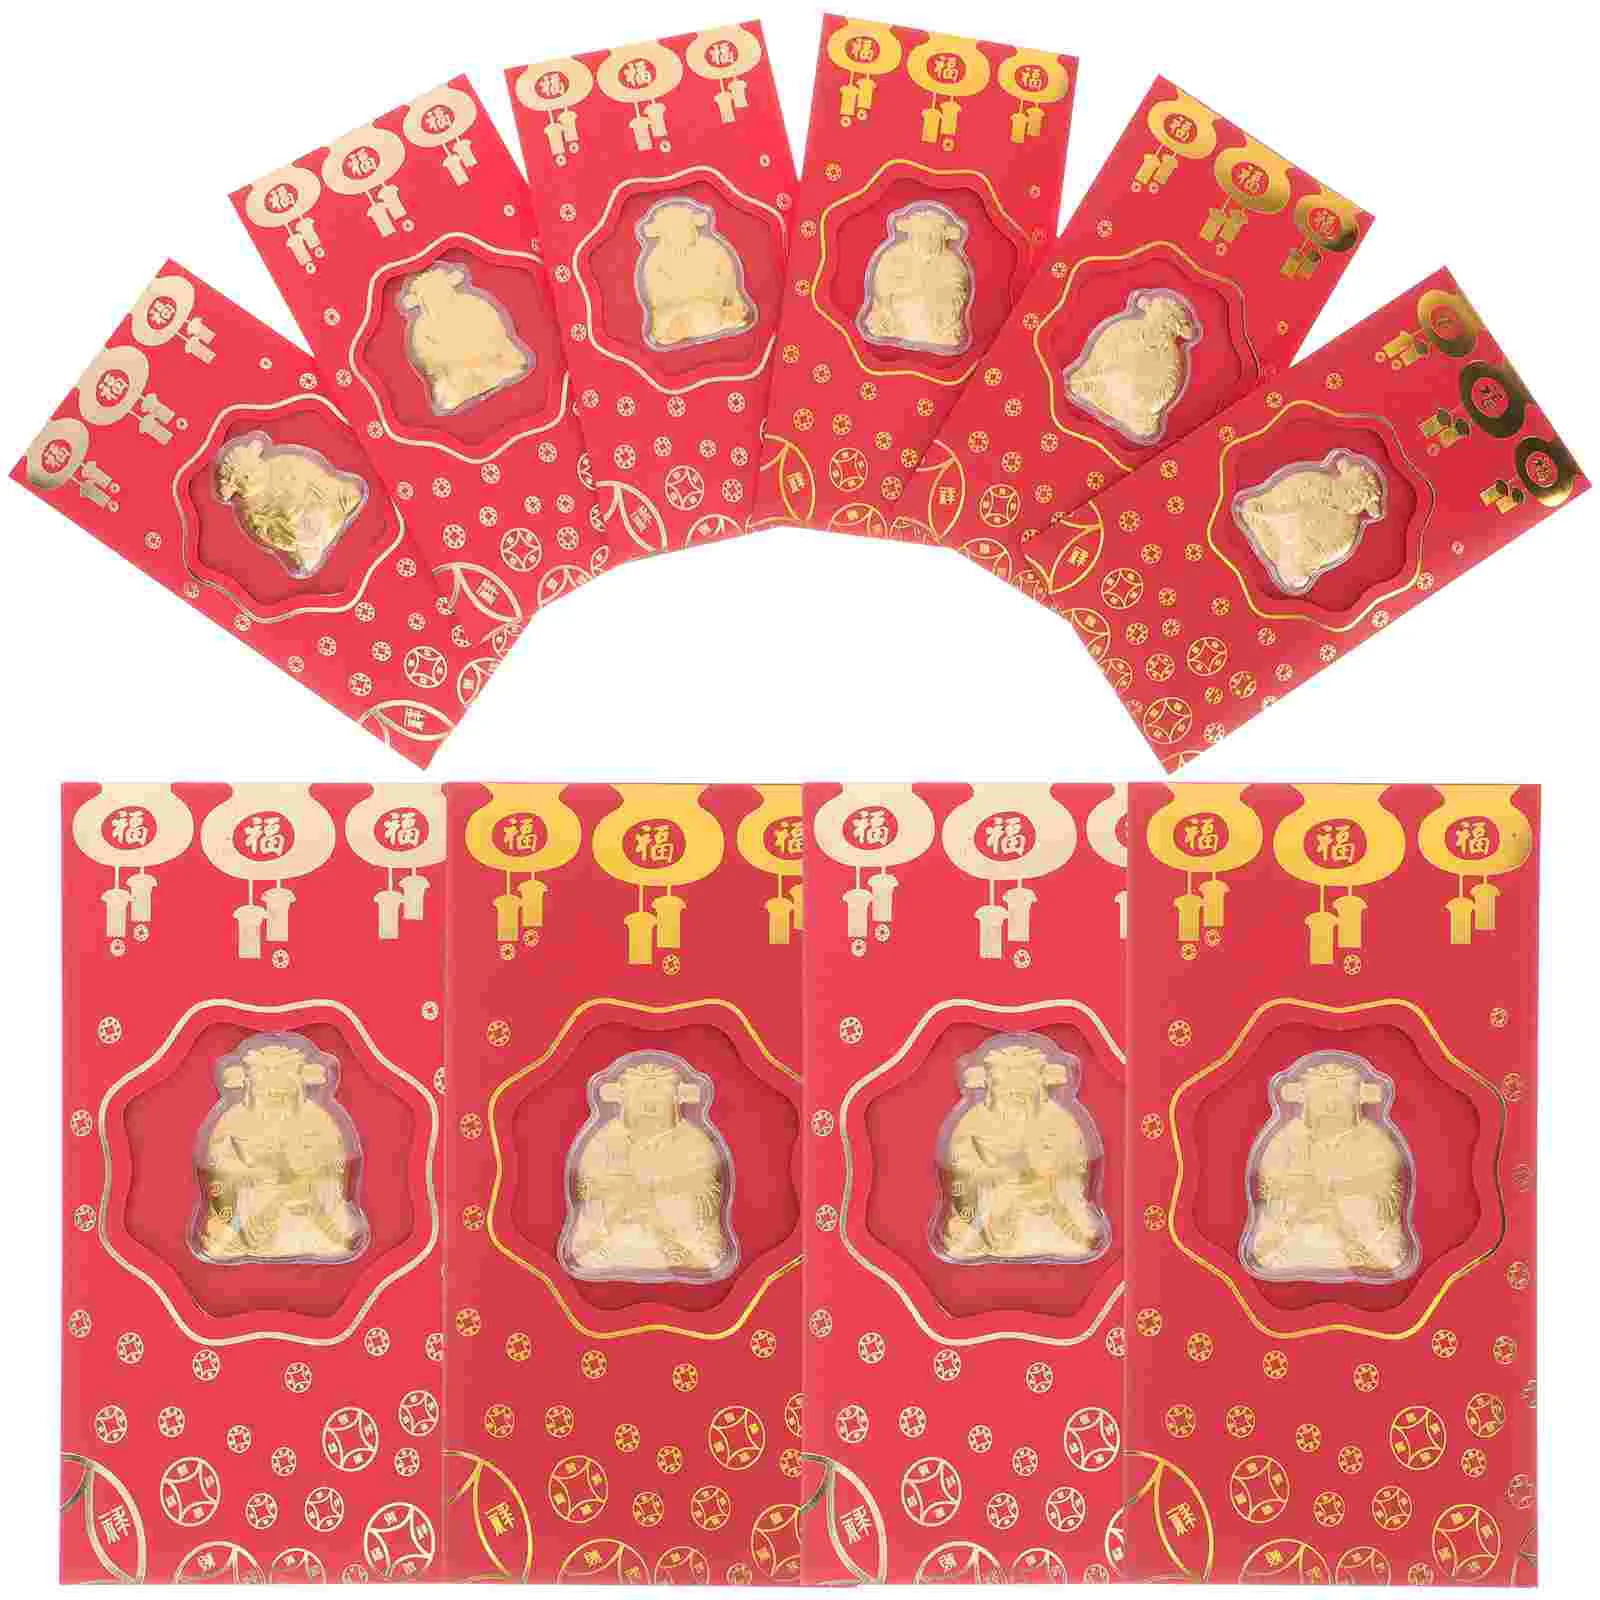 

10 Pcs God of Wealth Red Envelope Rabbit Year Envelopes Portable Chinese Traditional Kids Gold Leaf Money Packets